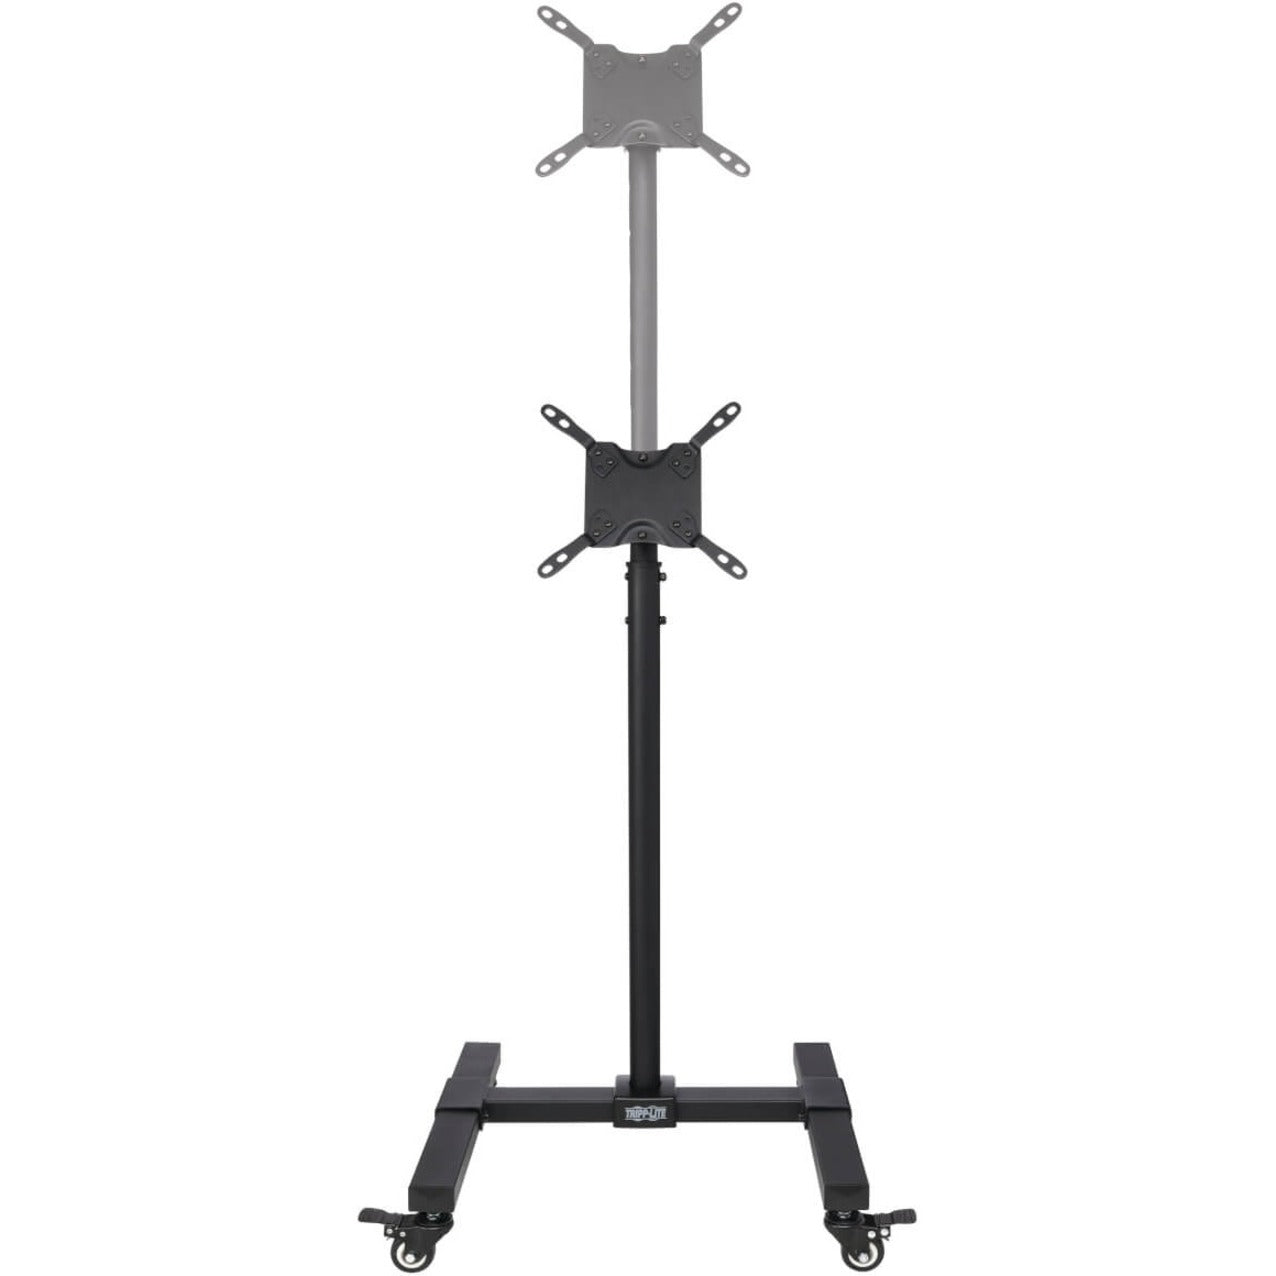 Tripp Lite DMC1342S Mobile TV Stand, 13" to 42" TVs and Monitors, Durable, Telescoping, Sturdy, Swivel Casters, Adjustable Angle, Powder Coated, Mobility, Tilt, Swivel, Cable Management, Scratch Resistant